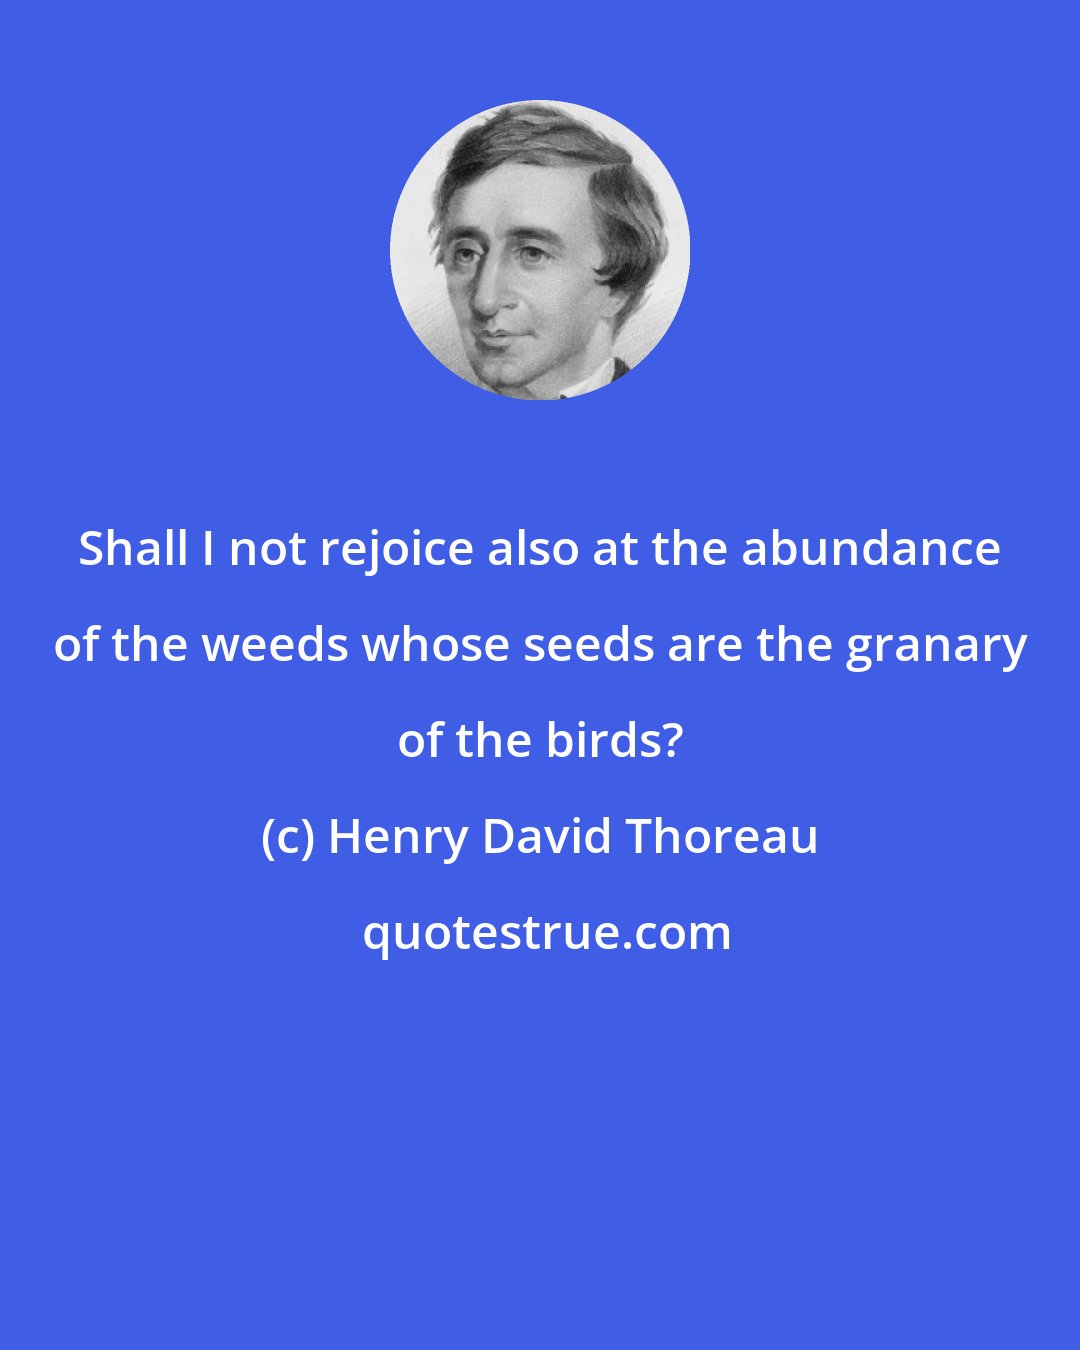 Henry David Thoreau: Shall I not rejoice also at the abundance of the weeds whose seeds are the granary of the birds?